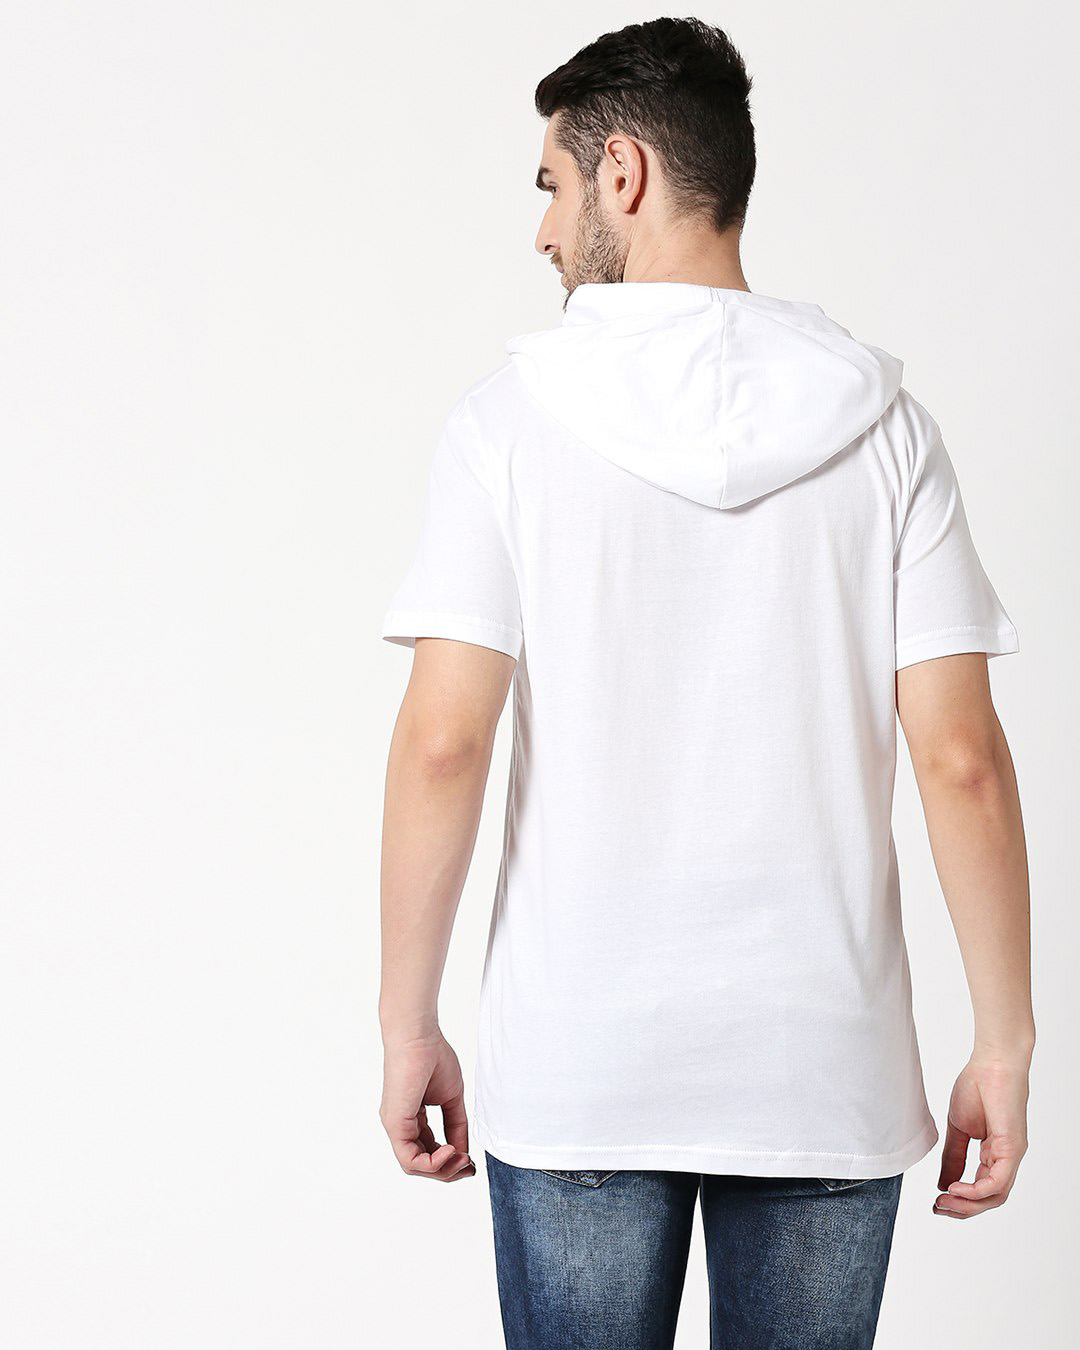 Shop Absolutely Awesome Bunny Half Sleeve Hoodie T-Shirt White-Back